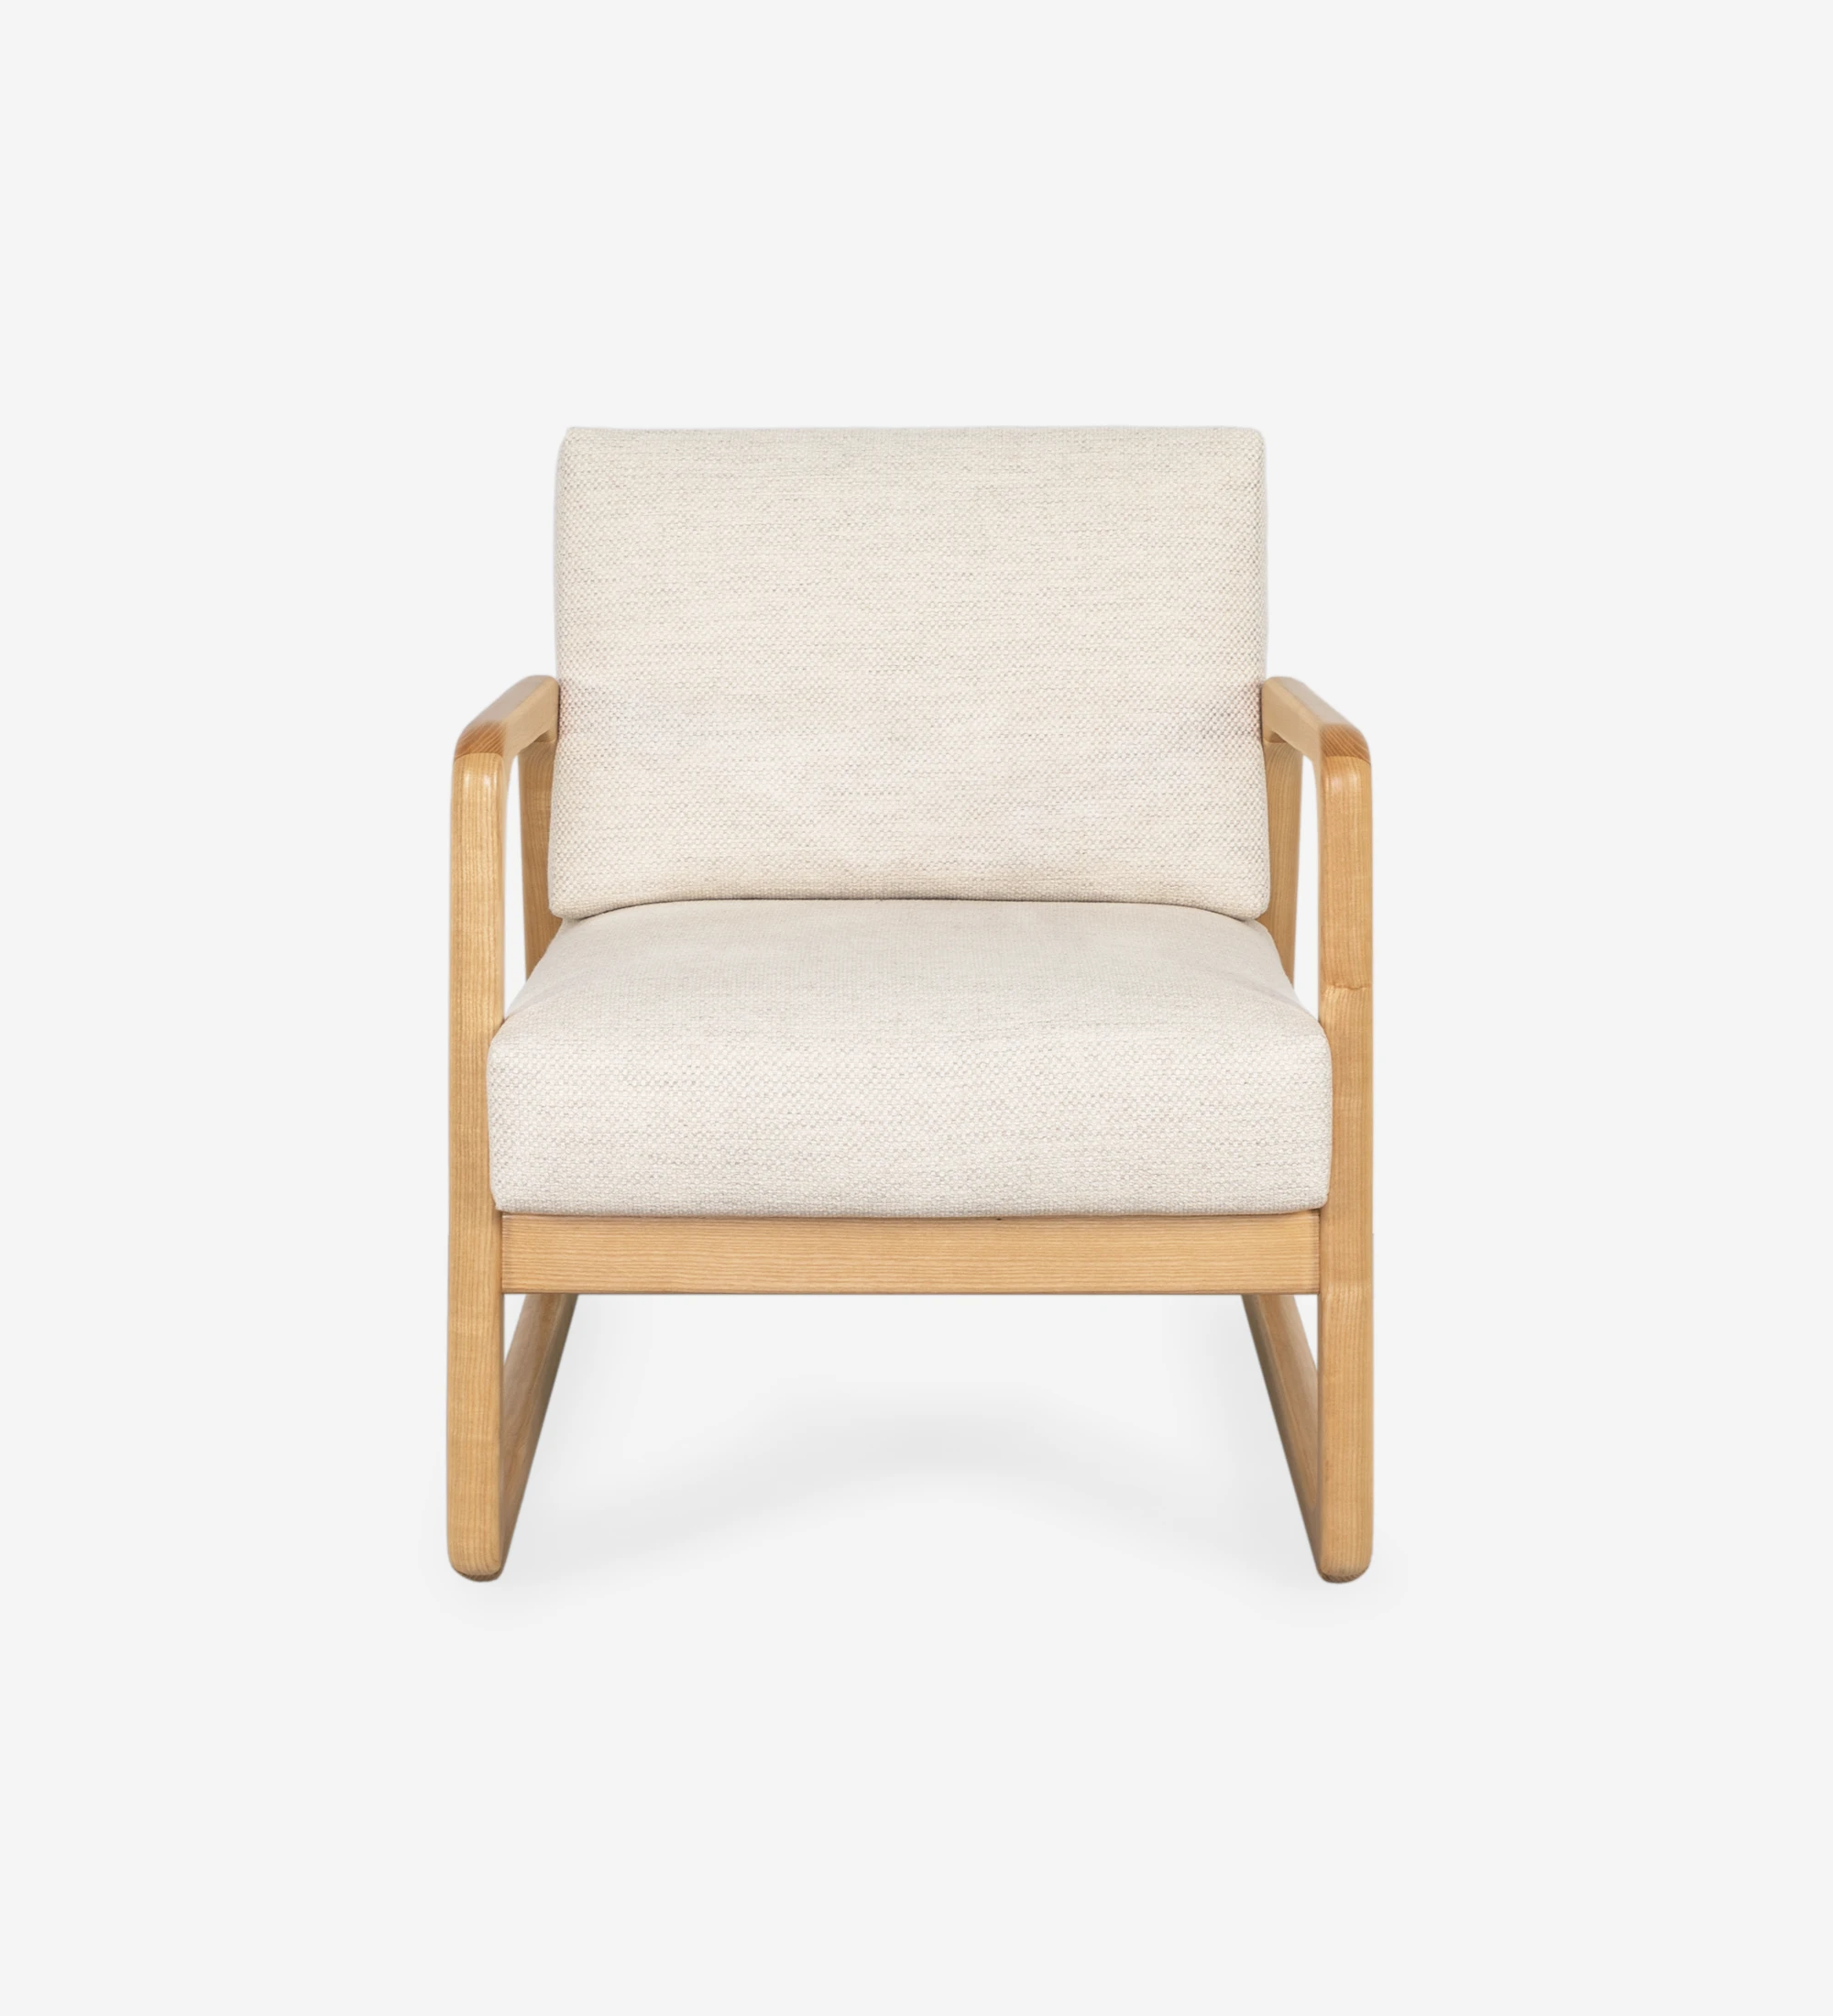 Antarte by AI Armchair upholstered in beige fabric, structure in natural wood.